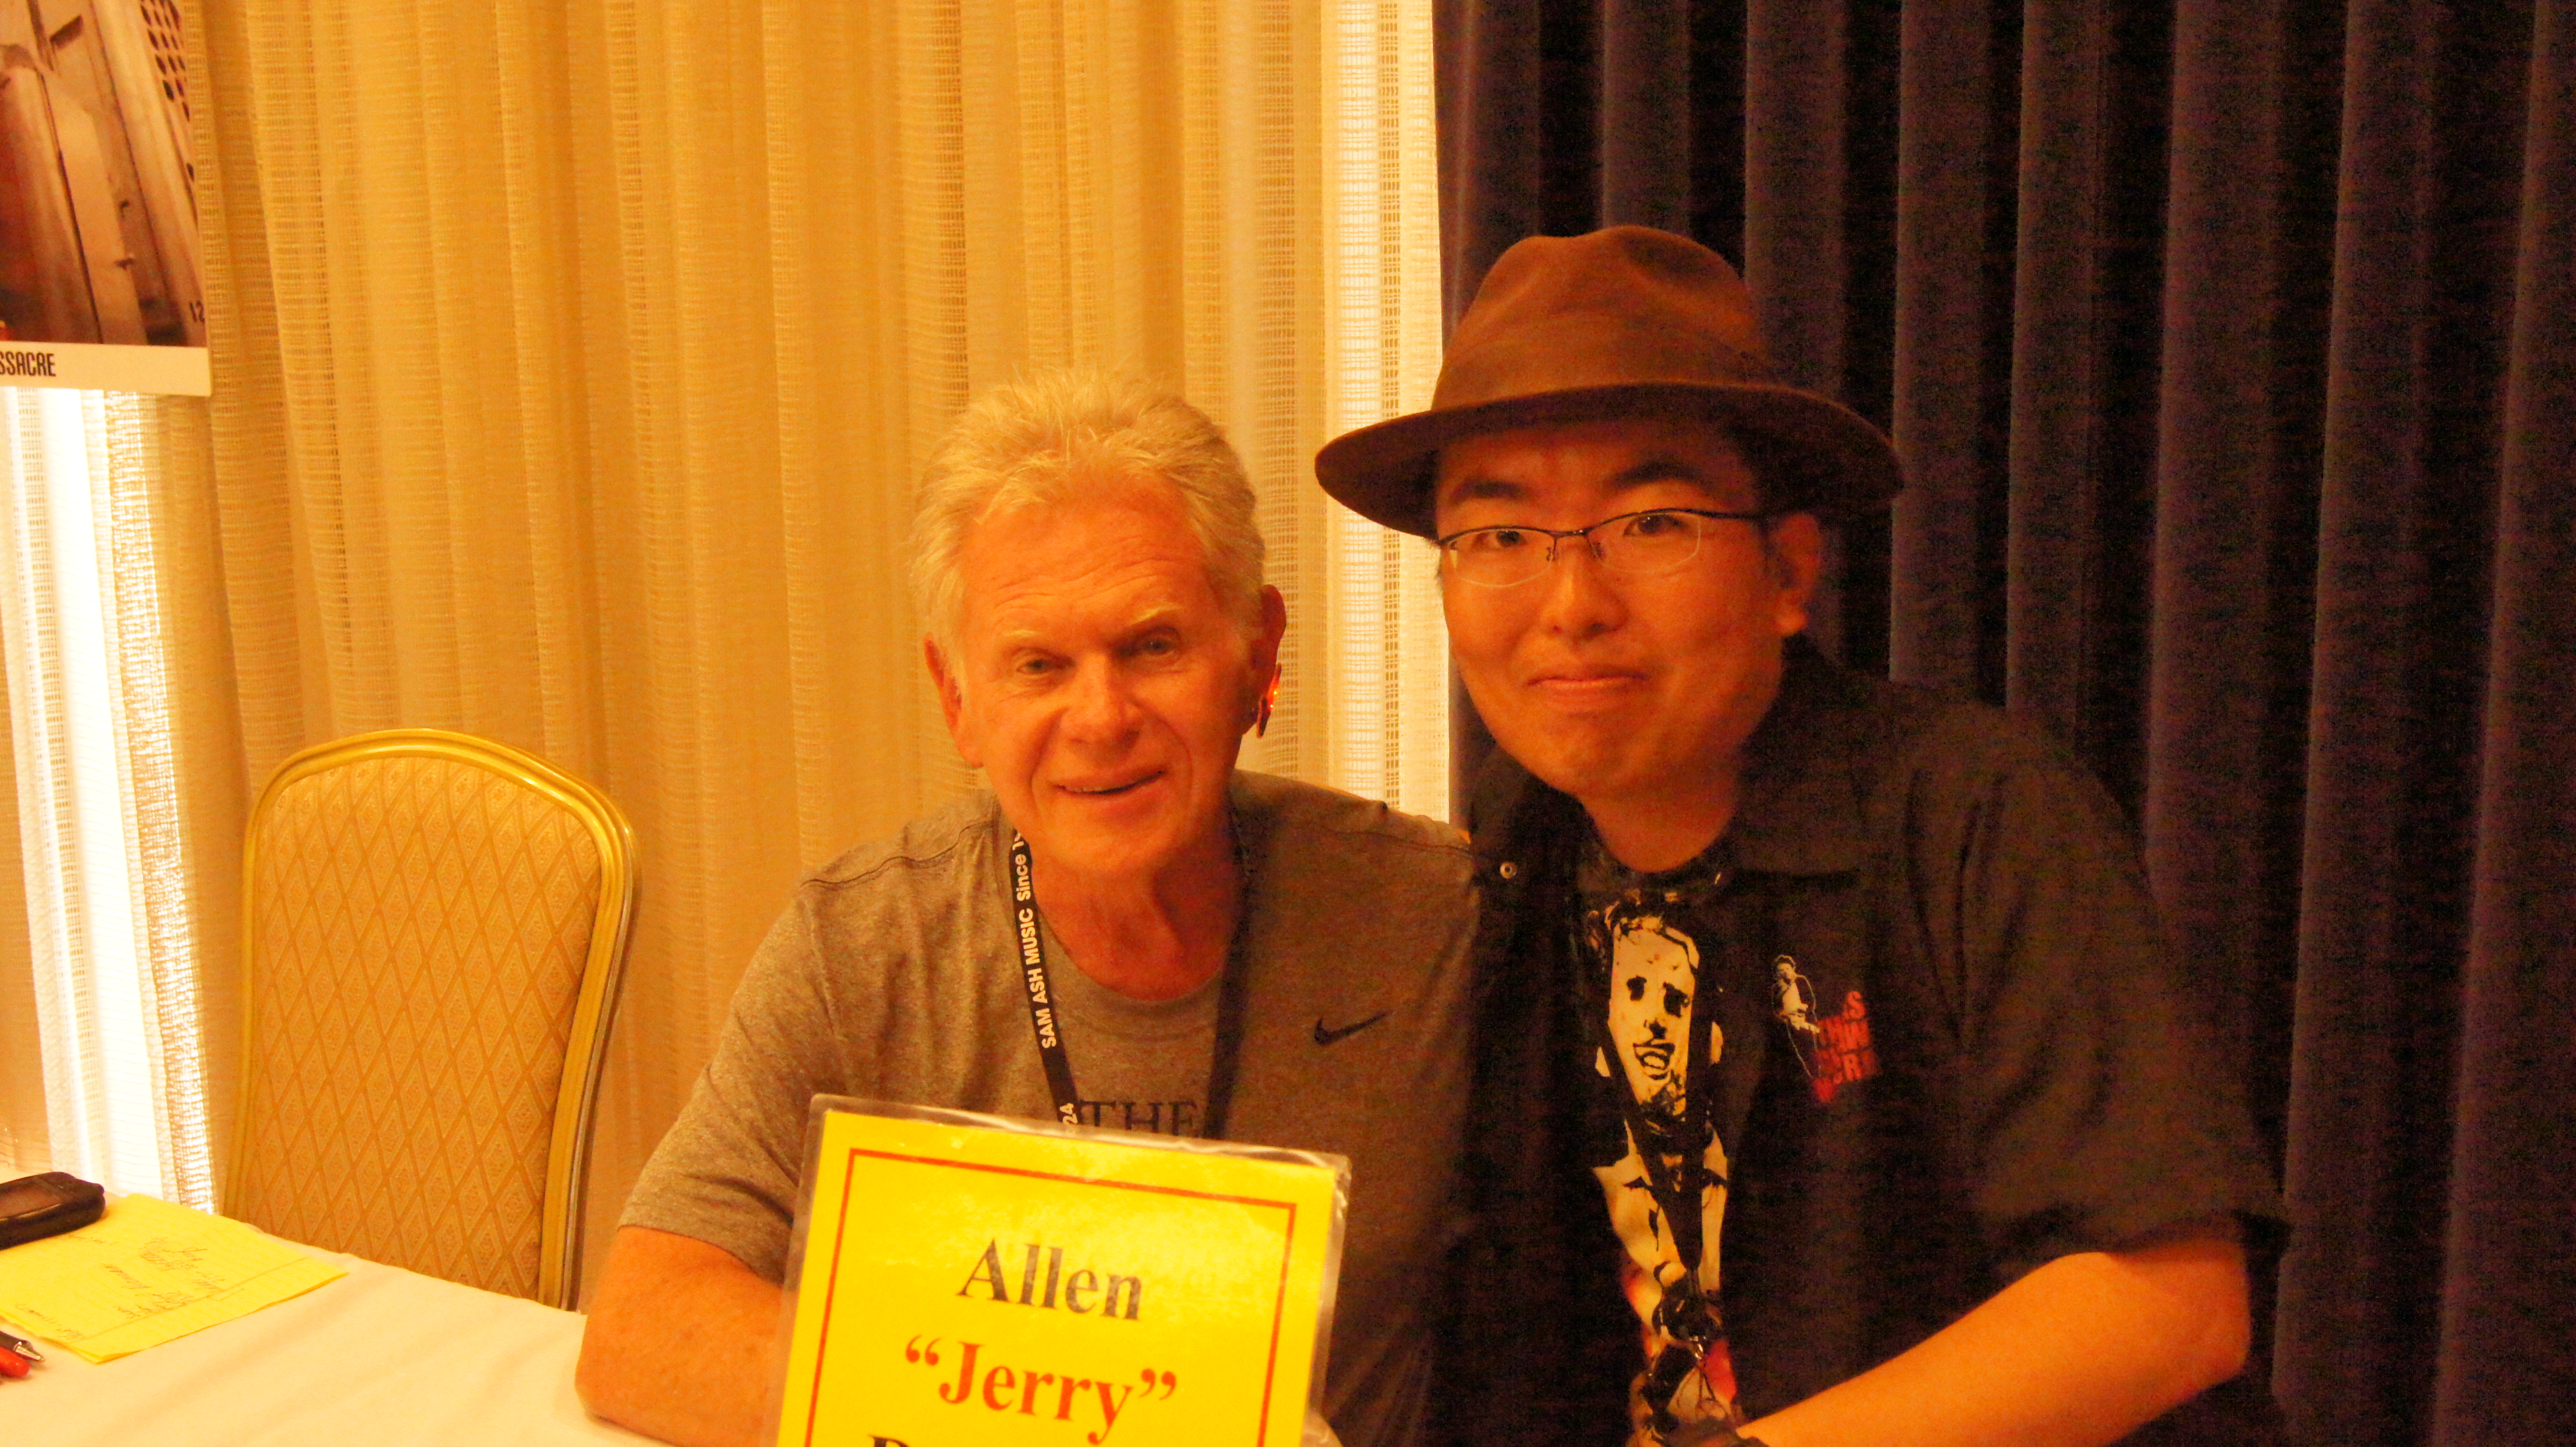 ''Jerry'' Allen Danziger from The Texas Chain Saw Massacre (1974) and the Japanese revolutionary filmmaker Ryota Nakanishi talked about genre filmmaking.